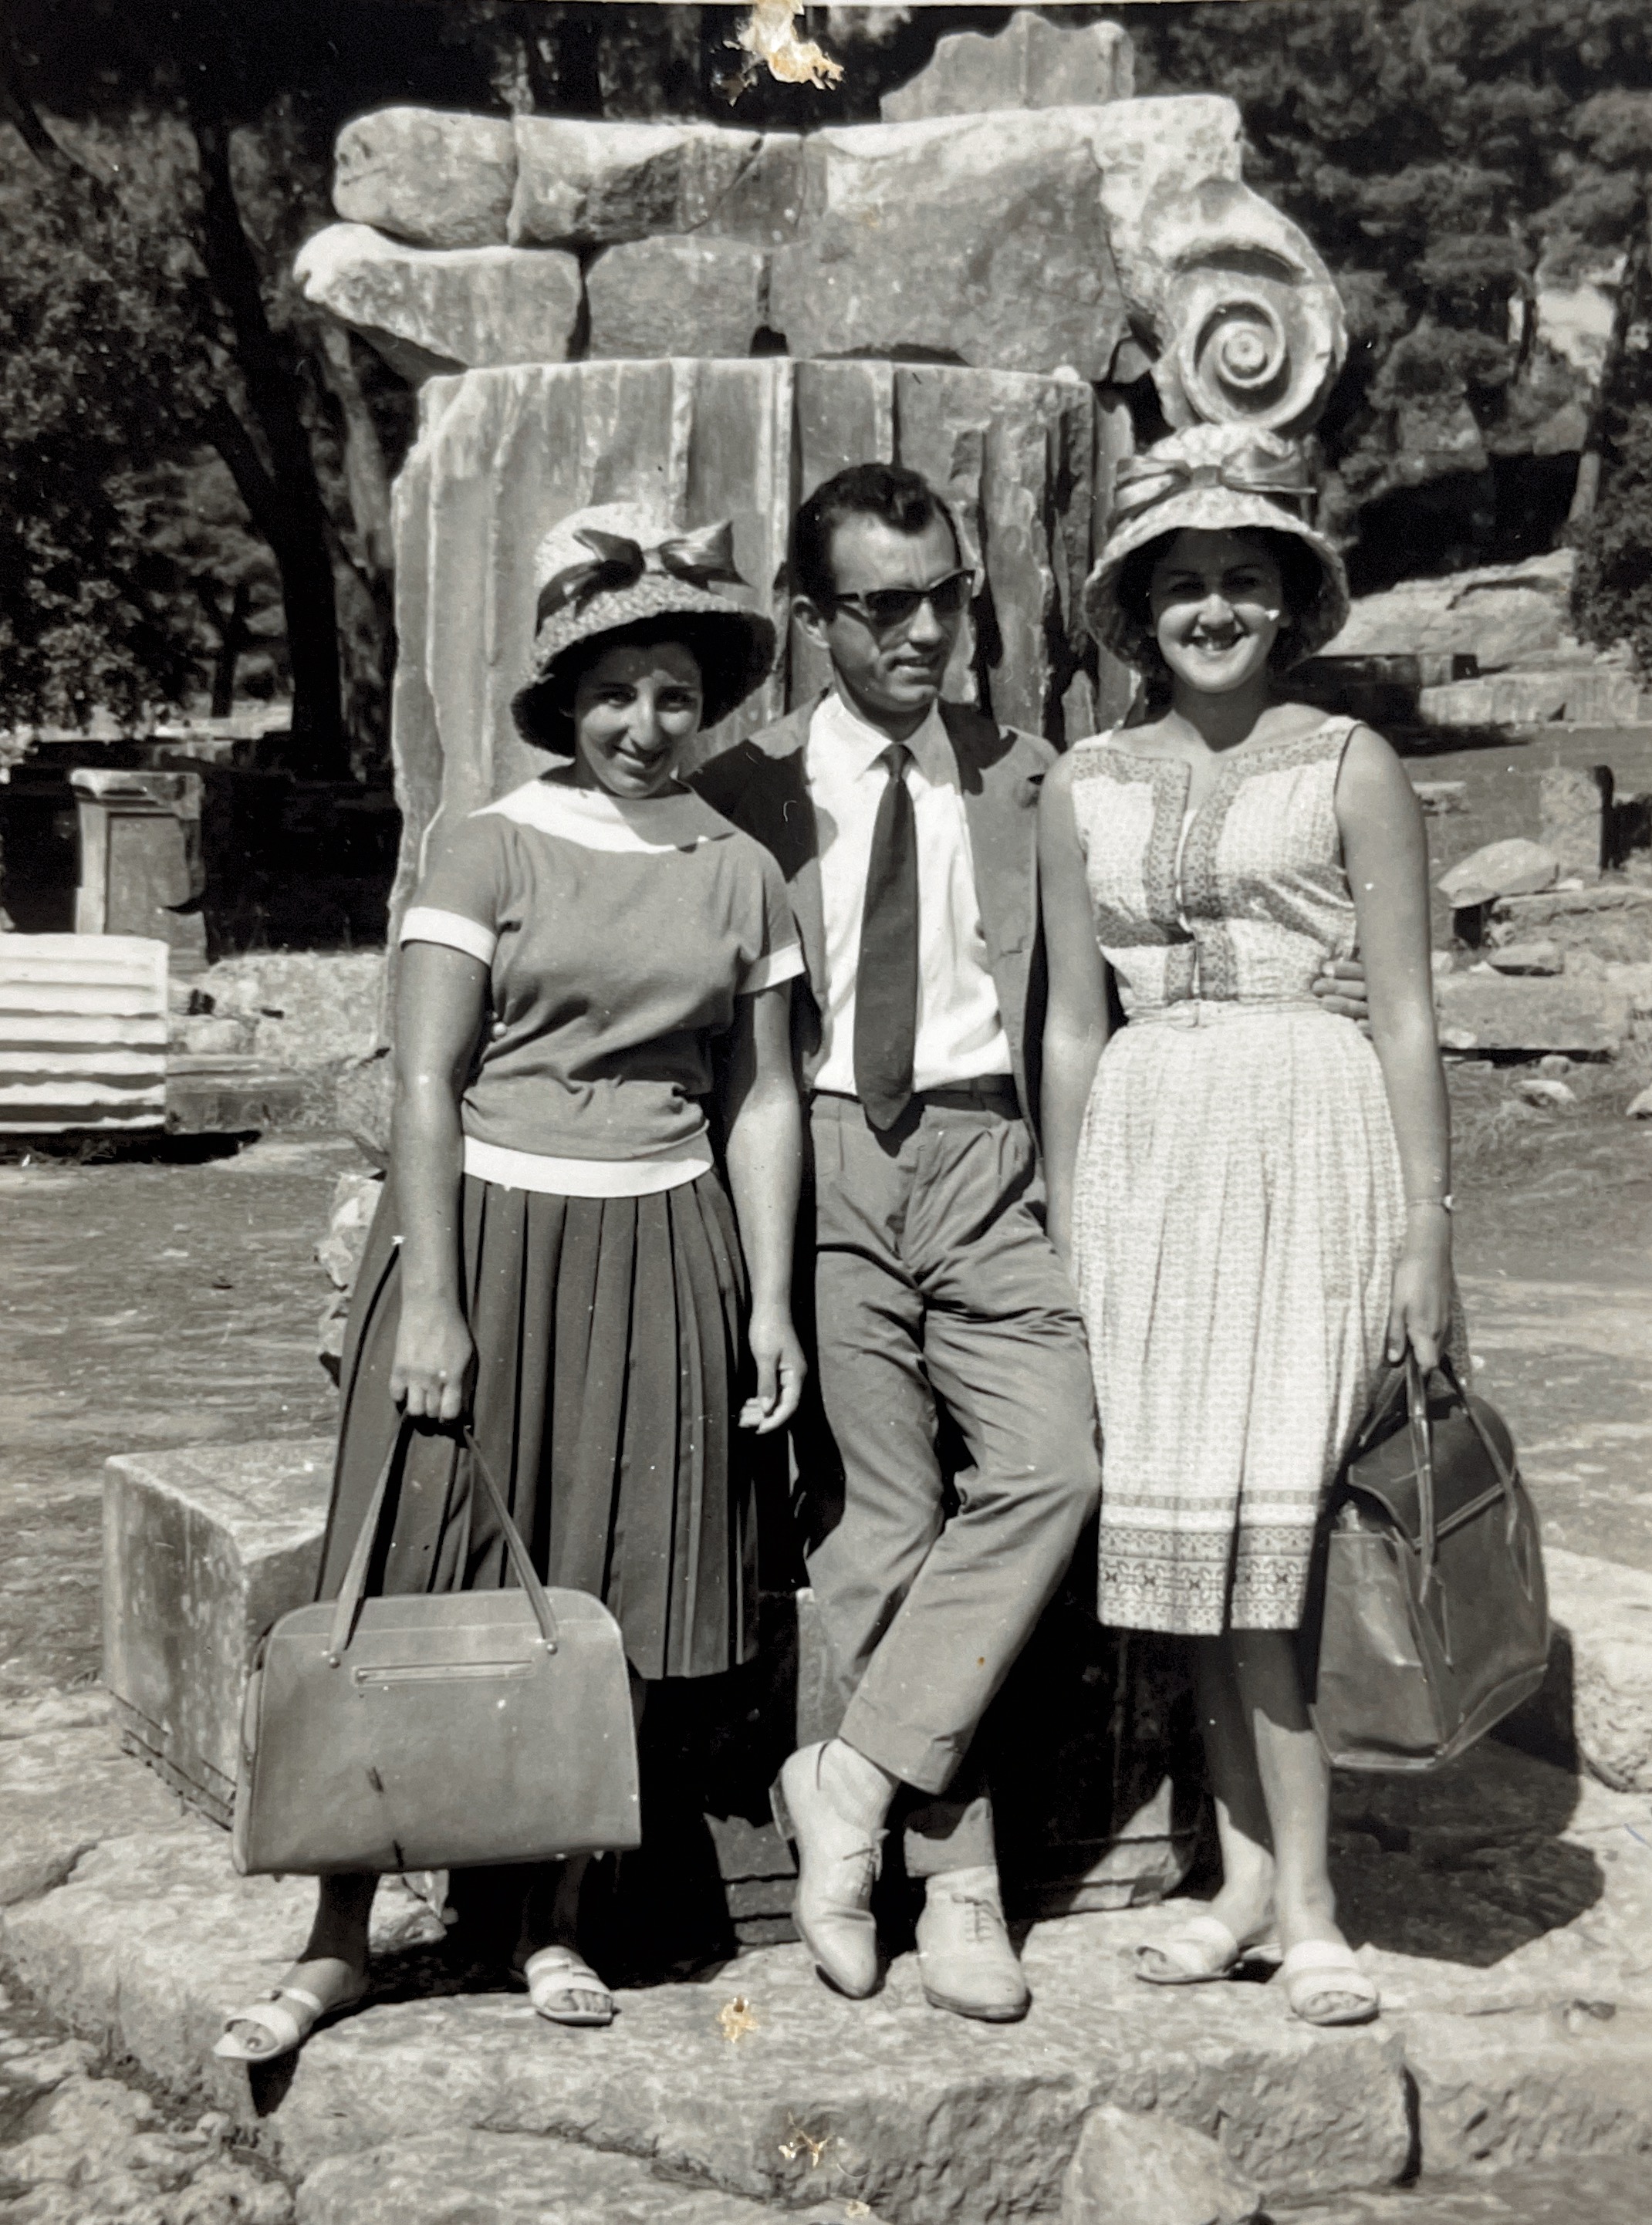 My mother Angela, her friend Joan and the guide, Mount Olympus, Greece 1961